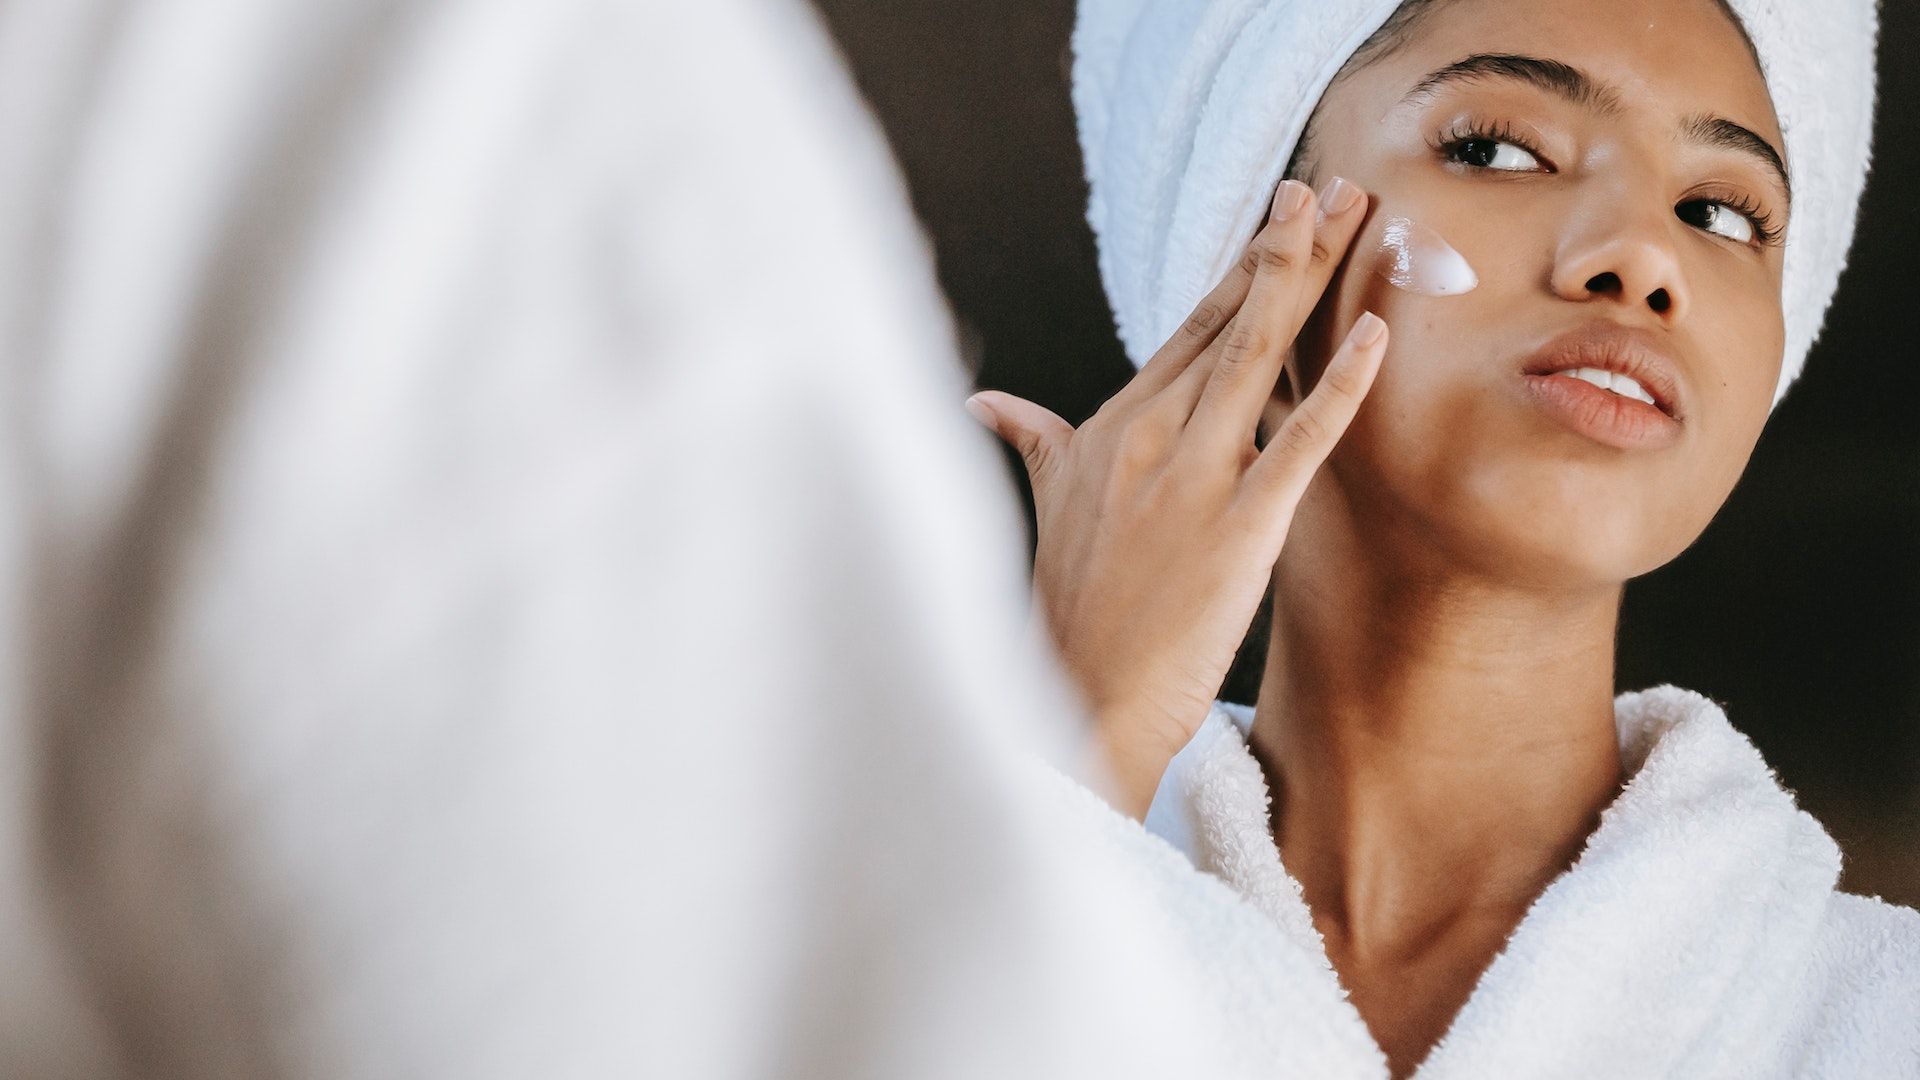 A complete guide on moisturizers and finding the best one for your skin